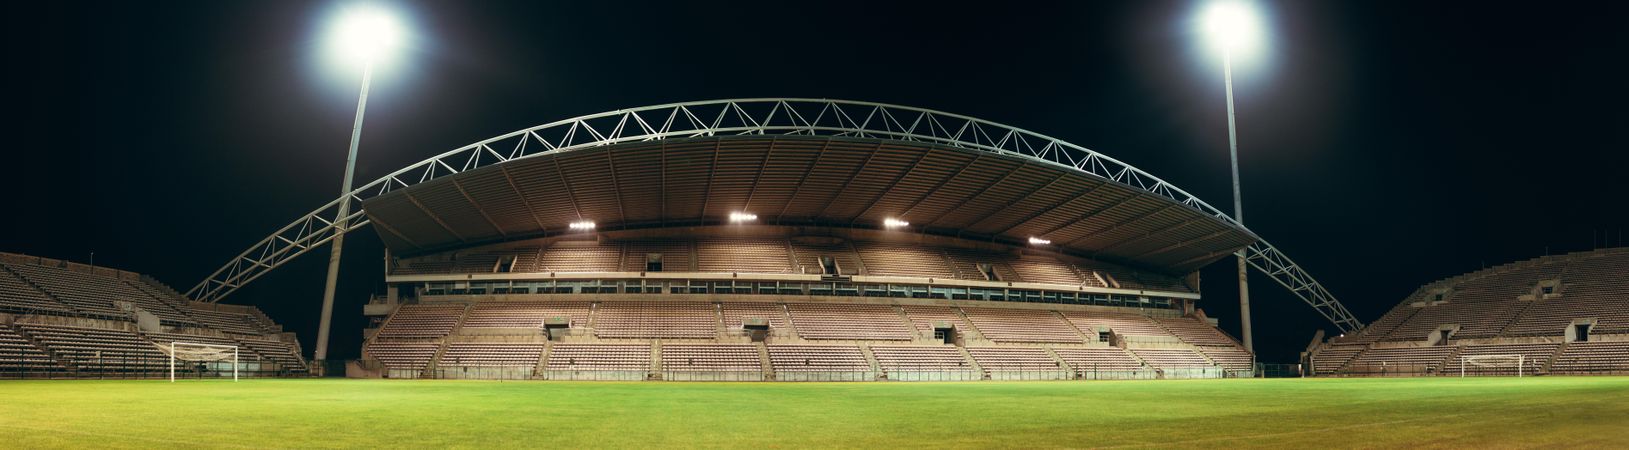 Huge empty football arena with lights